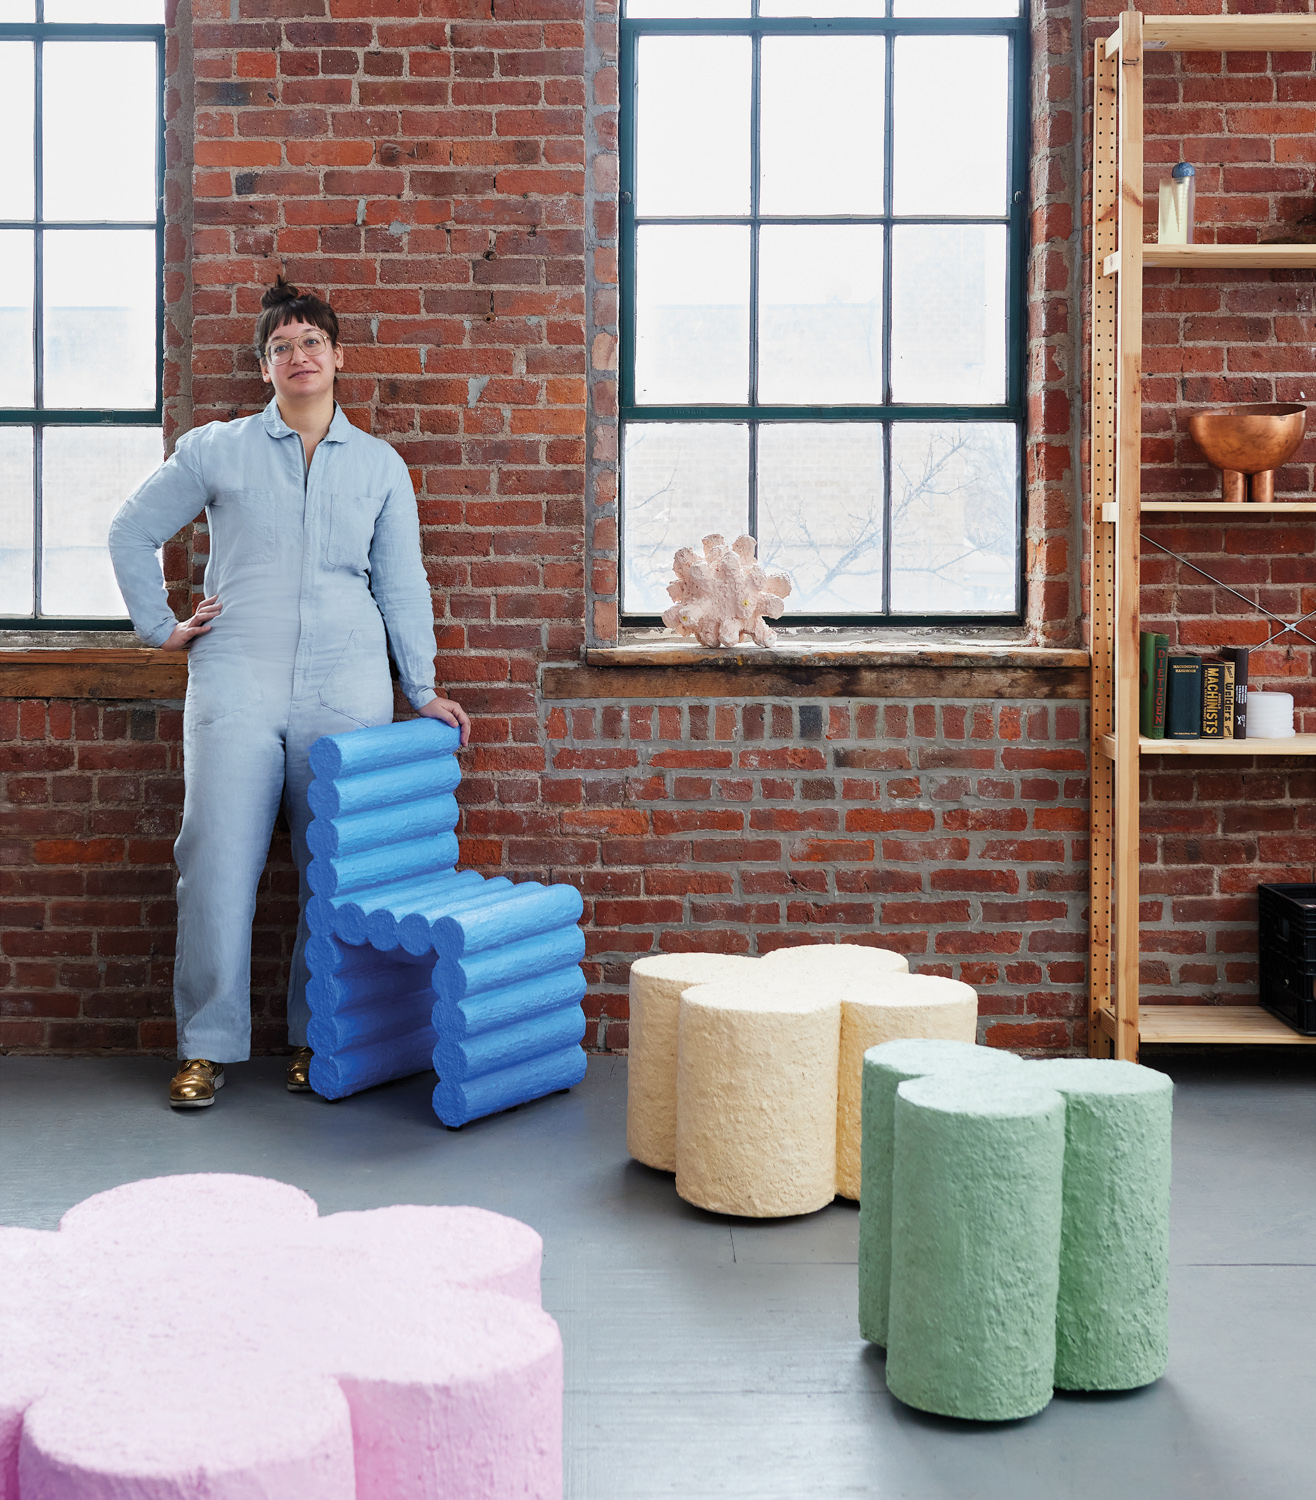 Furniture maker Hannah Bigeleisen leaning against blue chair with brick backdrop